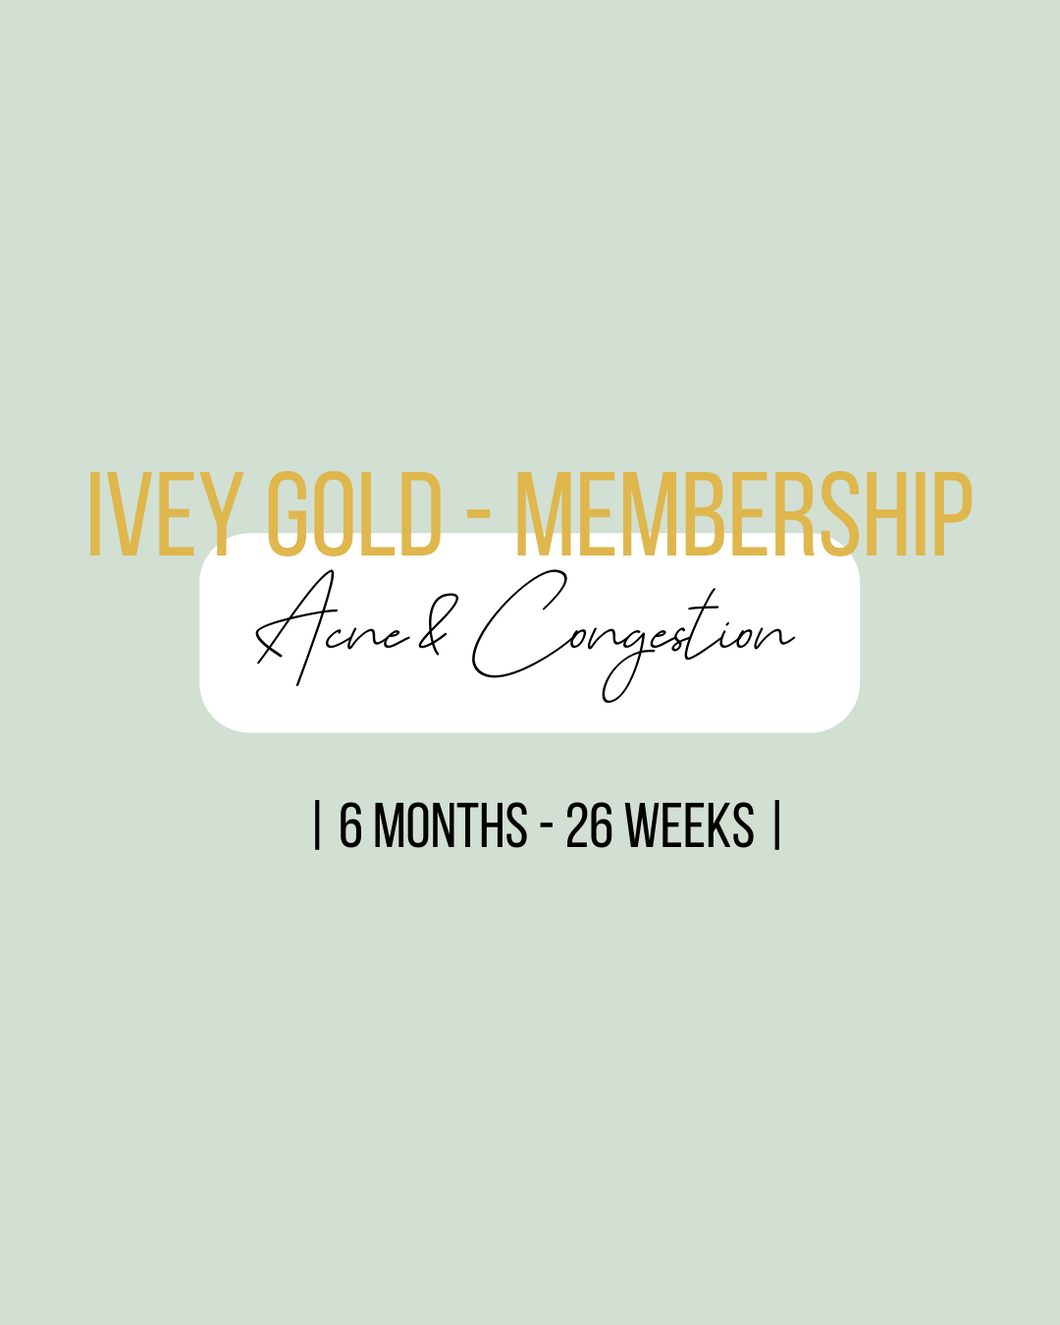 Acne & Congestion Membership 6 Months